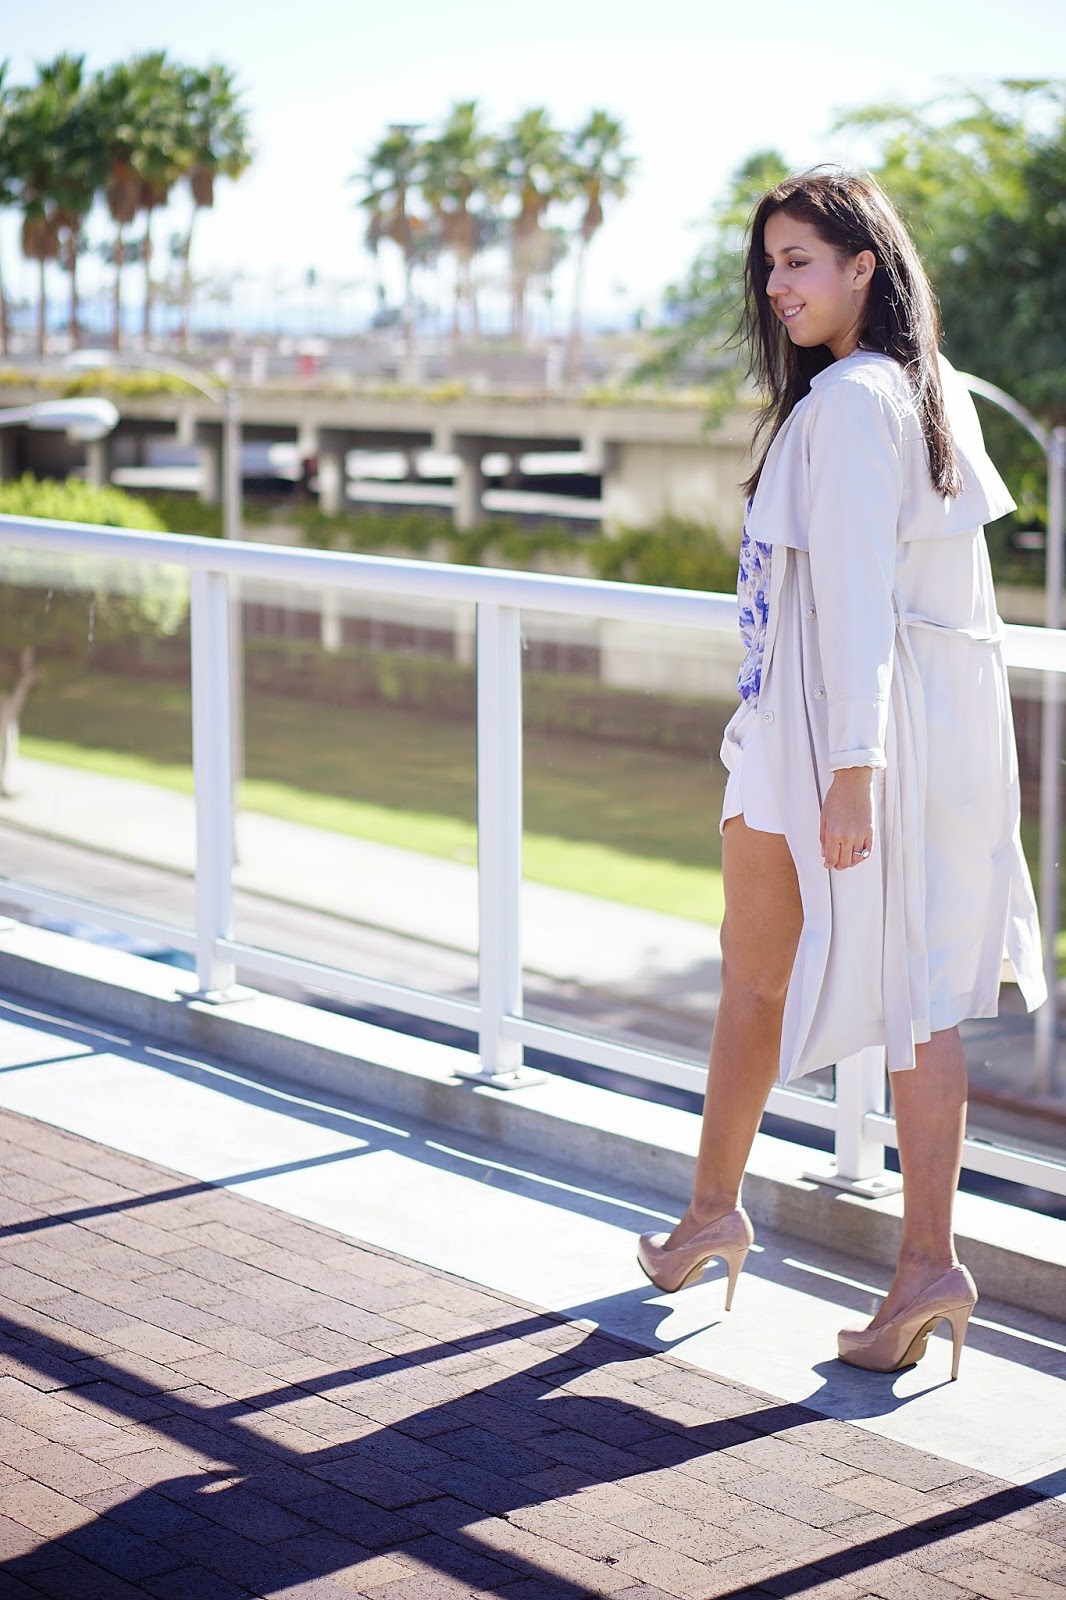 H&M trench coat, Flowy Trench coat, How to wear a Trench Coat, LC Lauren Conrad, Lauren Conrad Print Chiffon top, Nude Pumps, Simply Vera nude heels, White Skort, Forever 21 White Skort, 